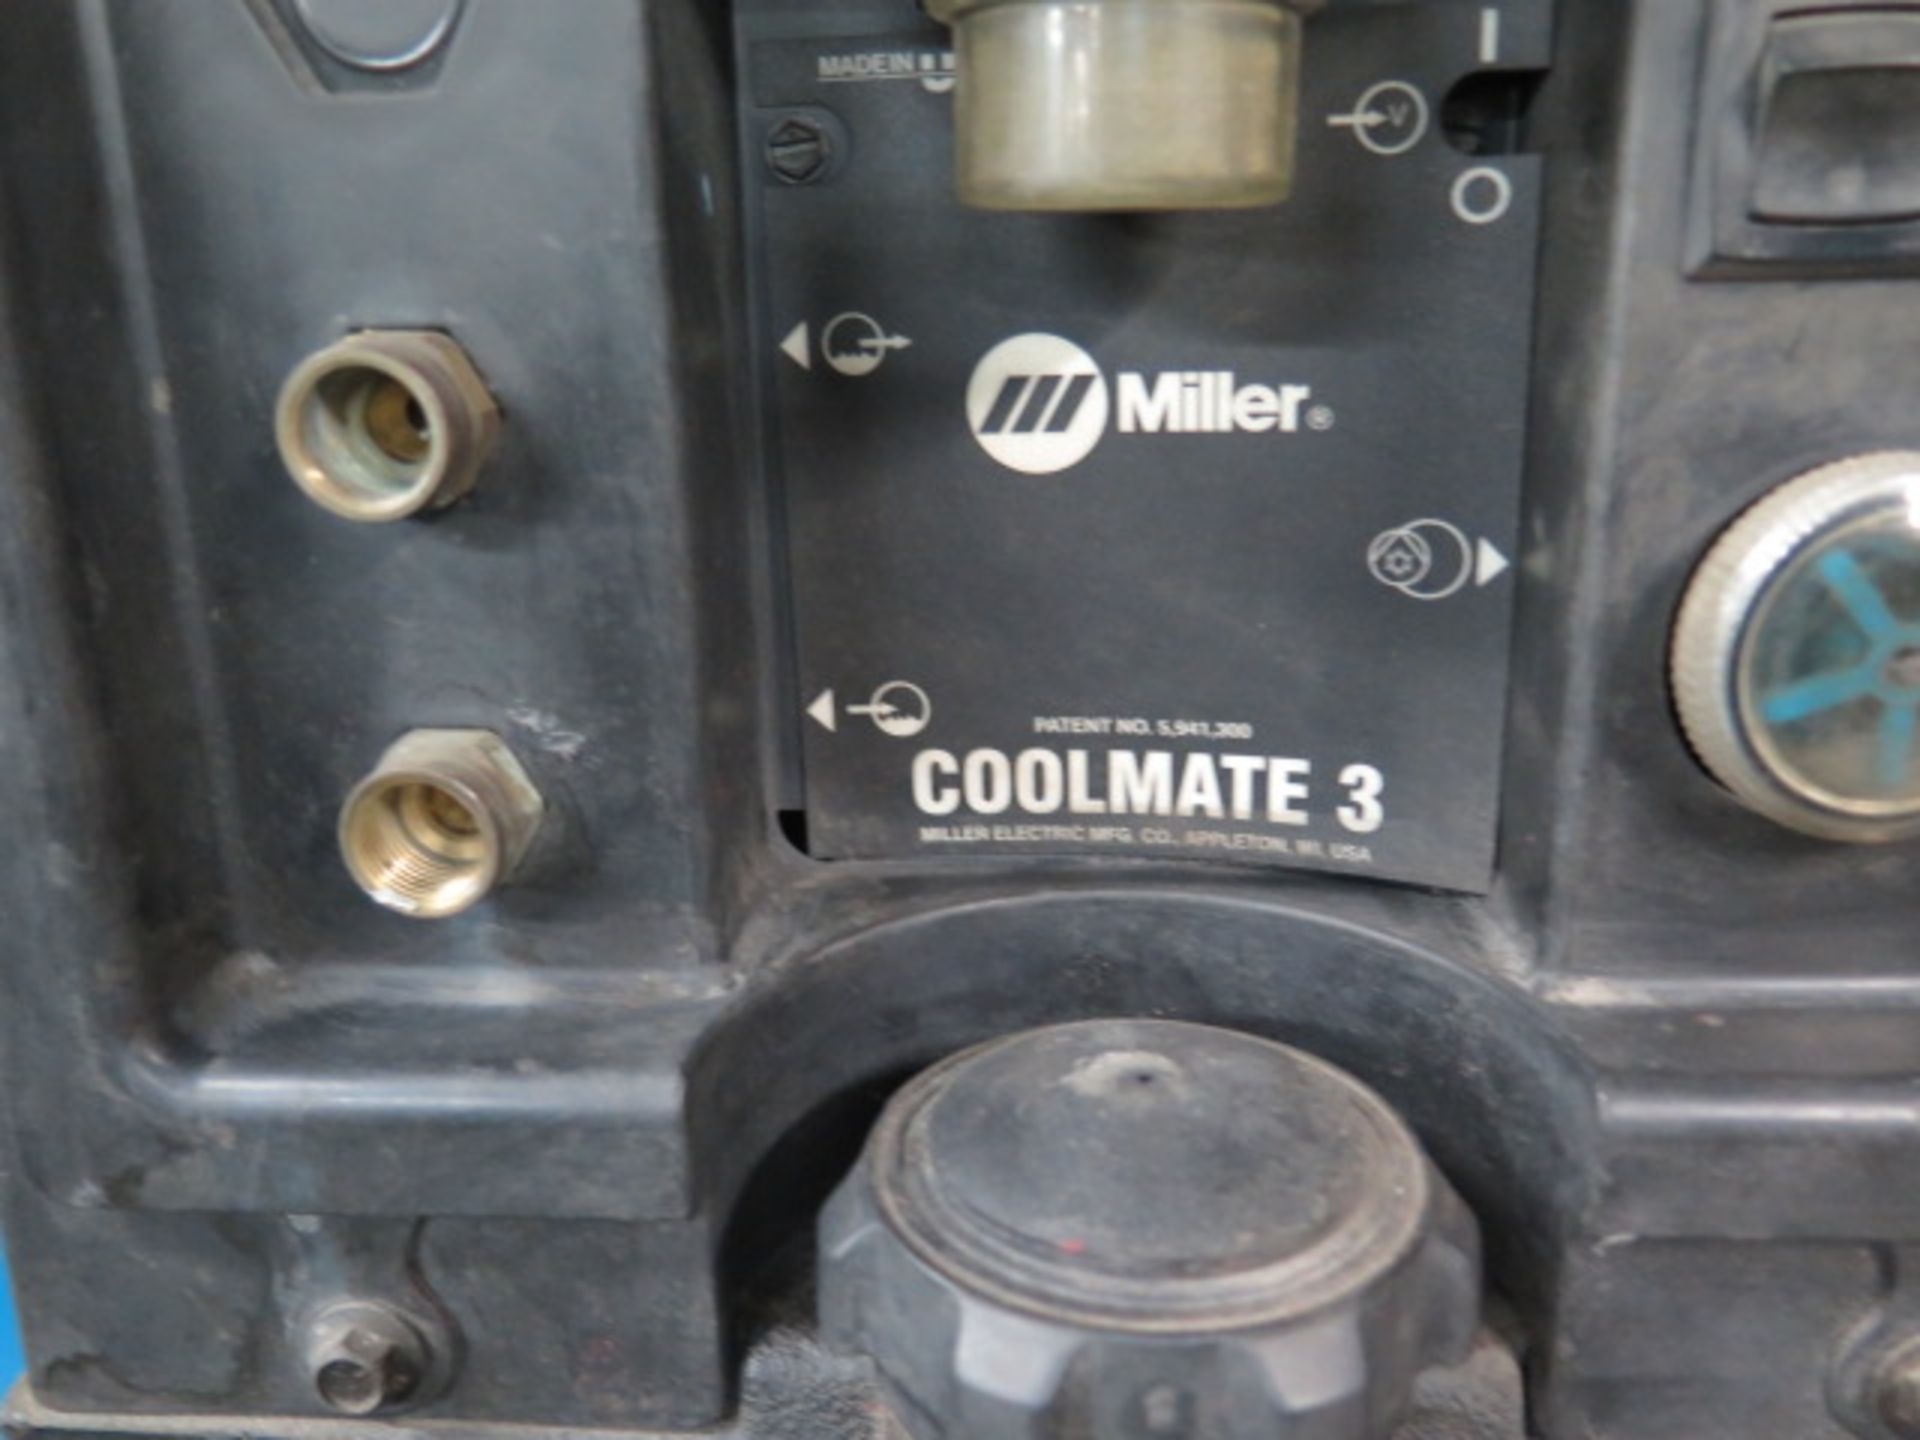 Miller Syncrowave 250 CC-AC/DC Arc Welding Power Source w/ Miller Coolmate-3 Cooling, SOLD AS IS - Image 7 of 9